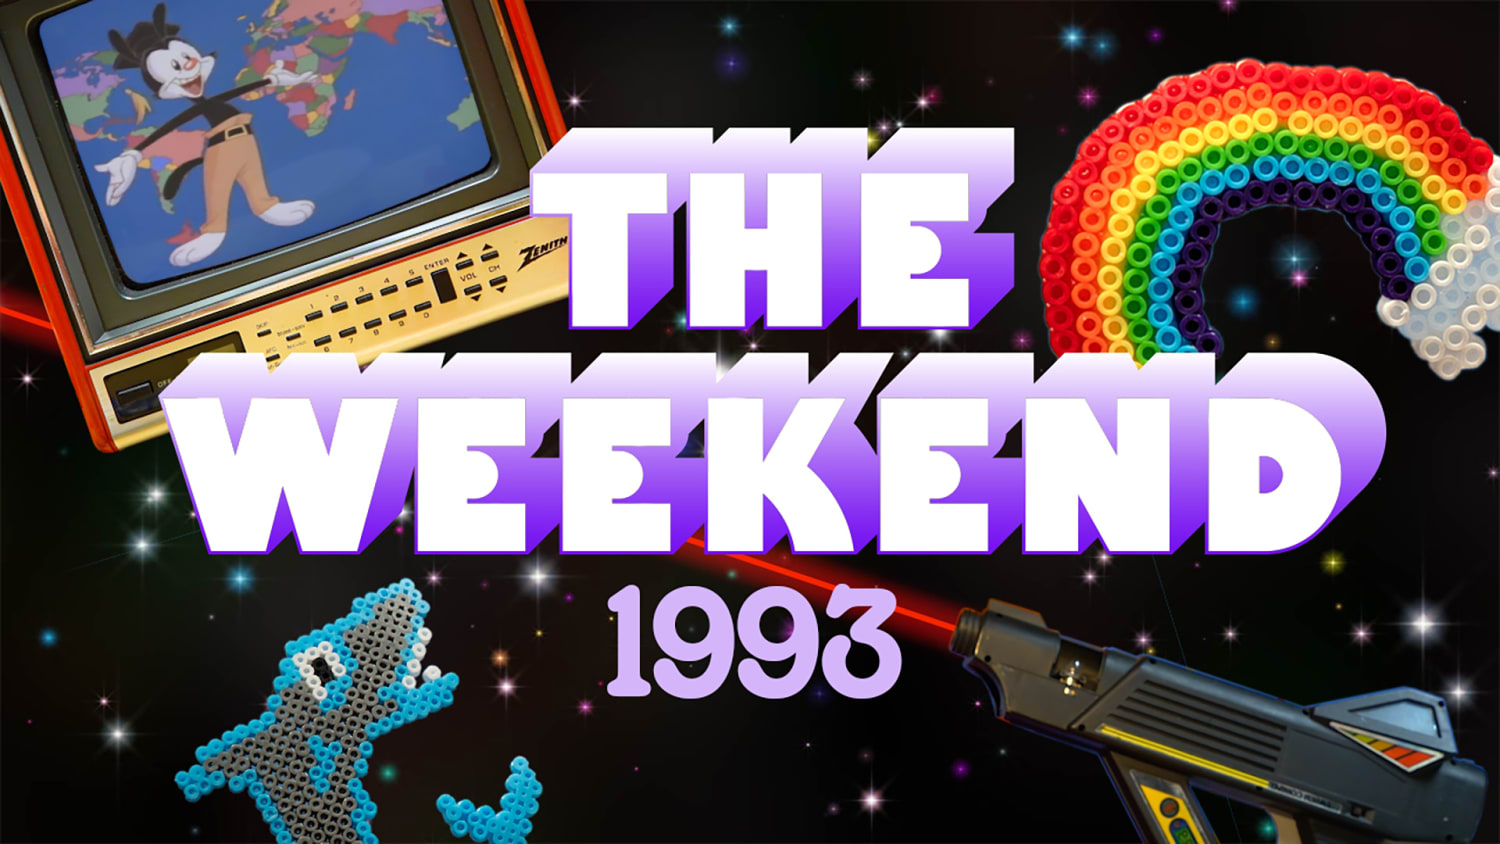 Remember When: A Weekend in 1993